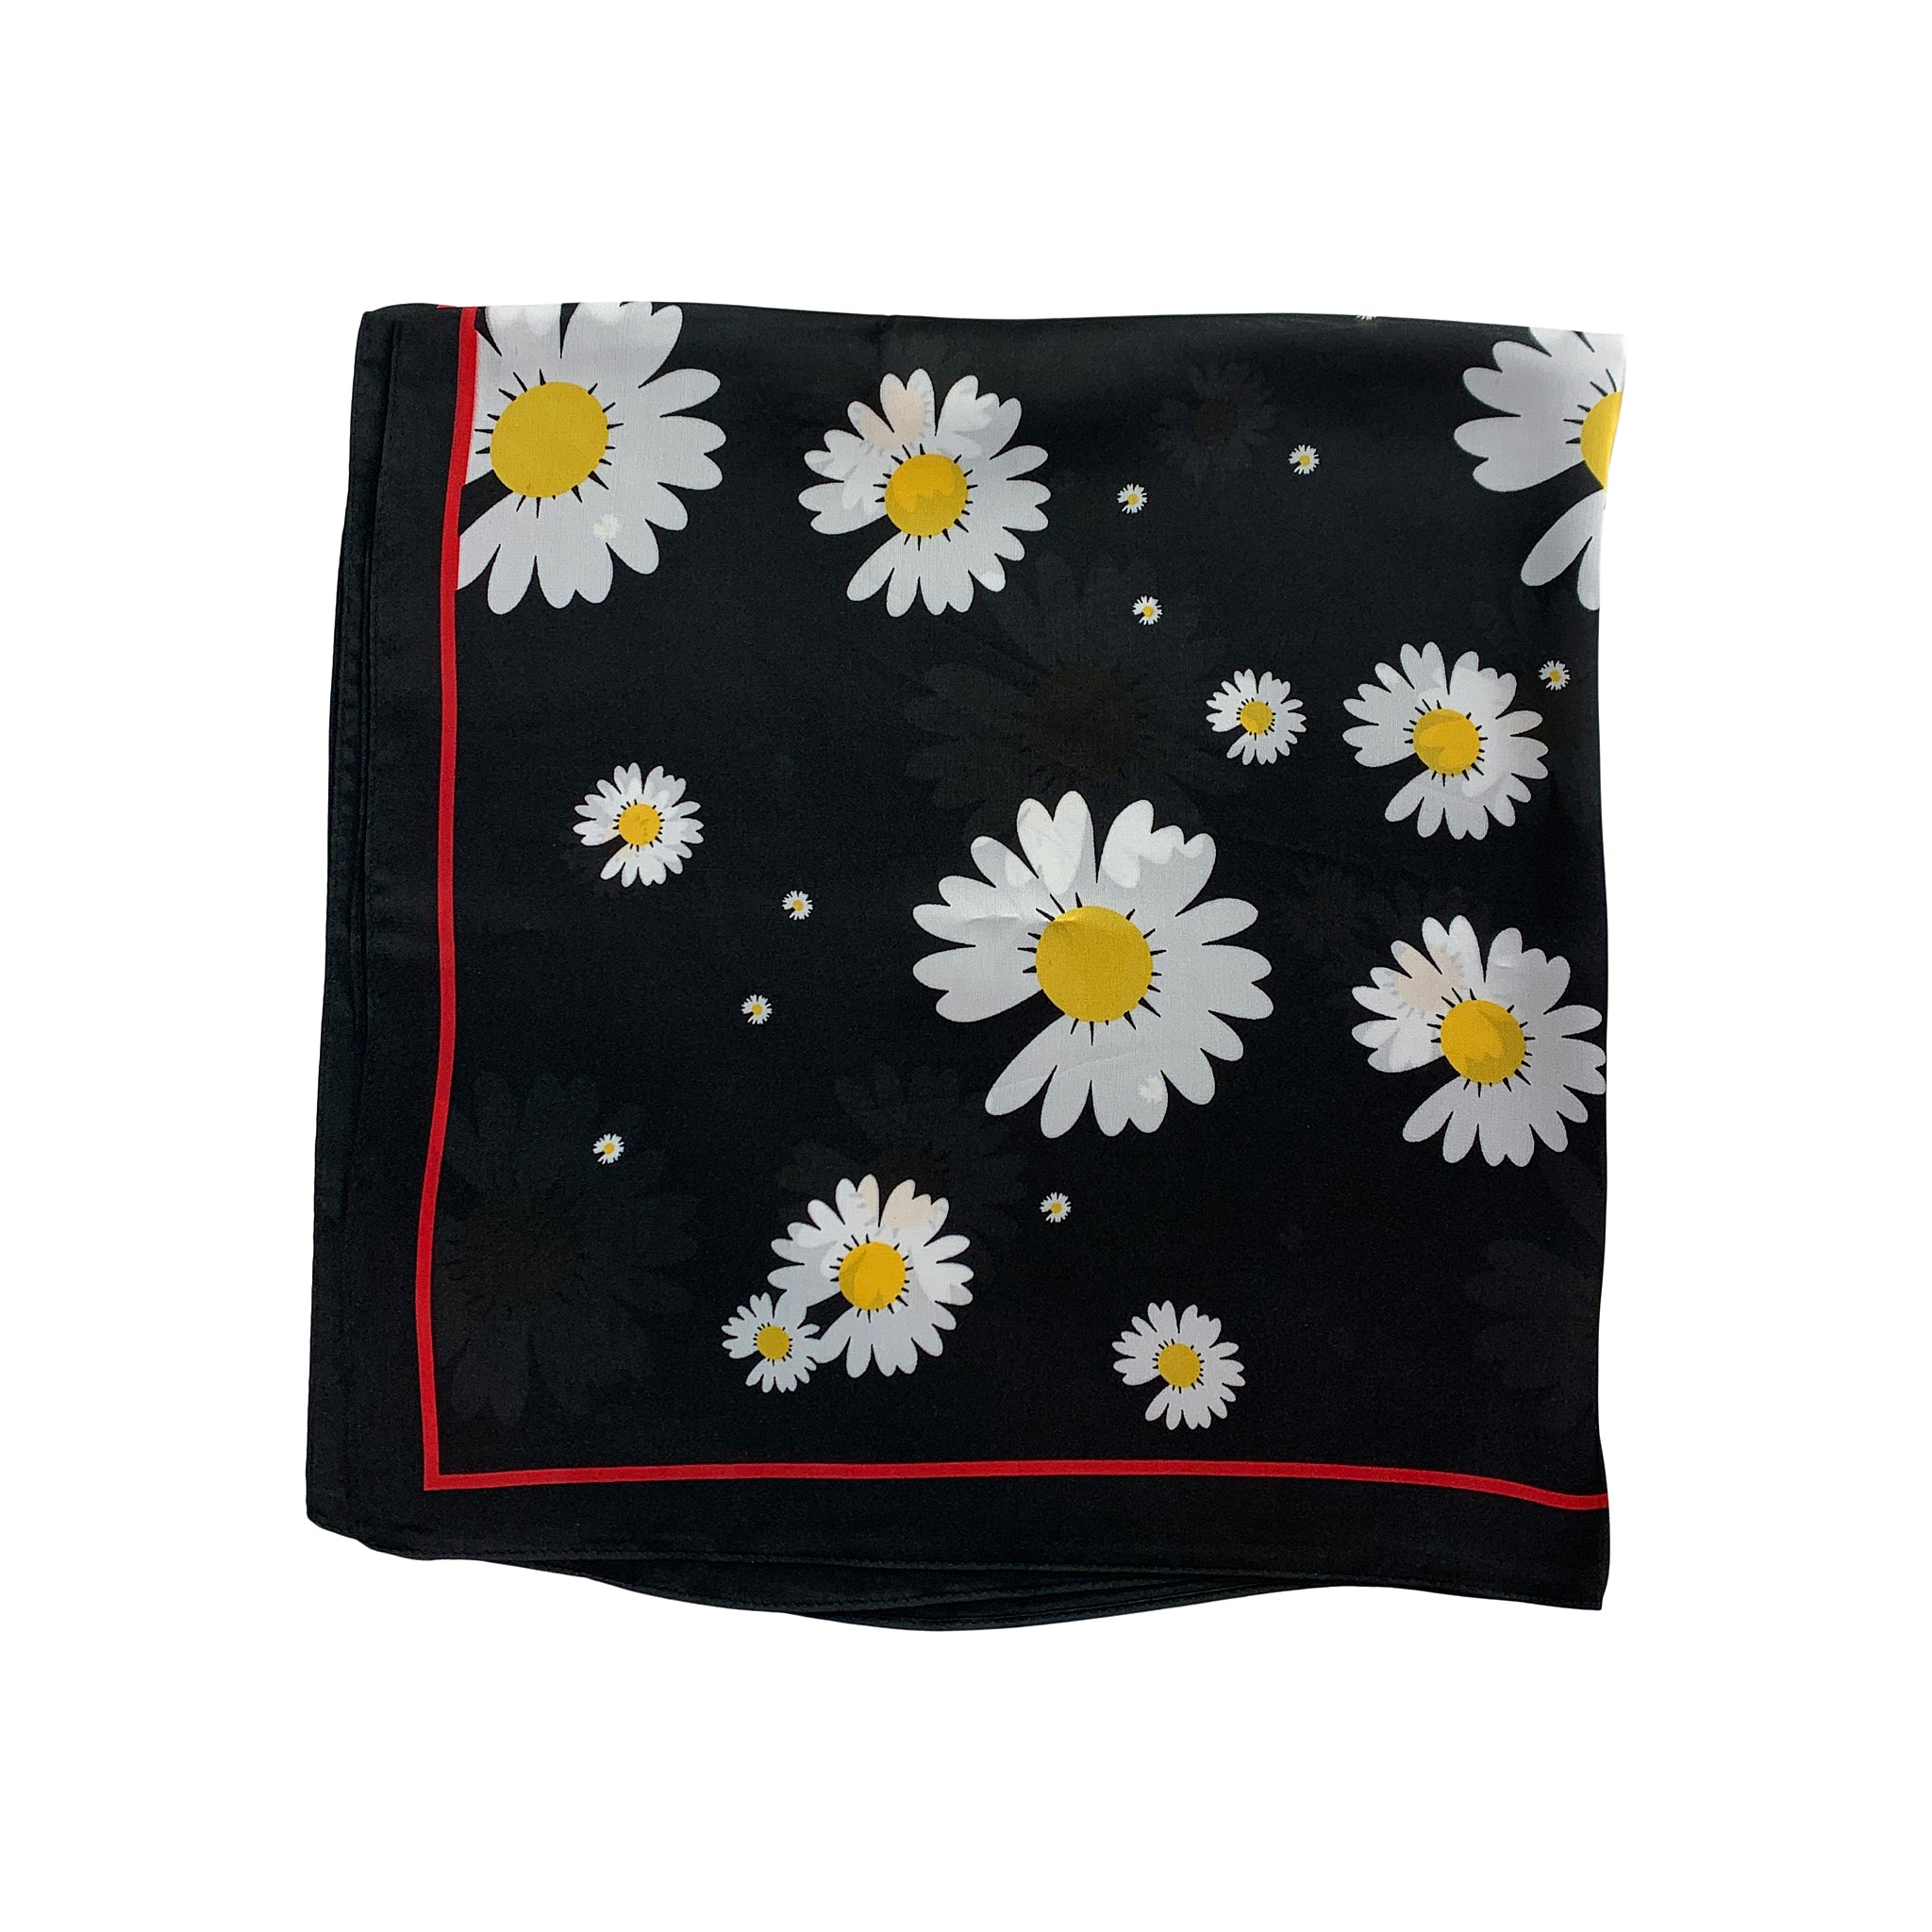 Avenue Zoe Chamomile Print Silky Bandana Scarf in Black, White and Yellow Floral